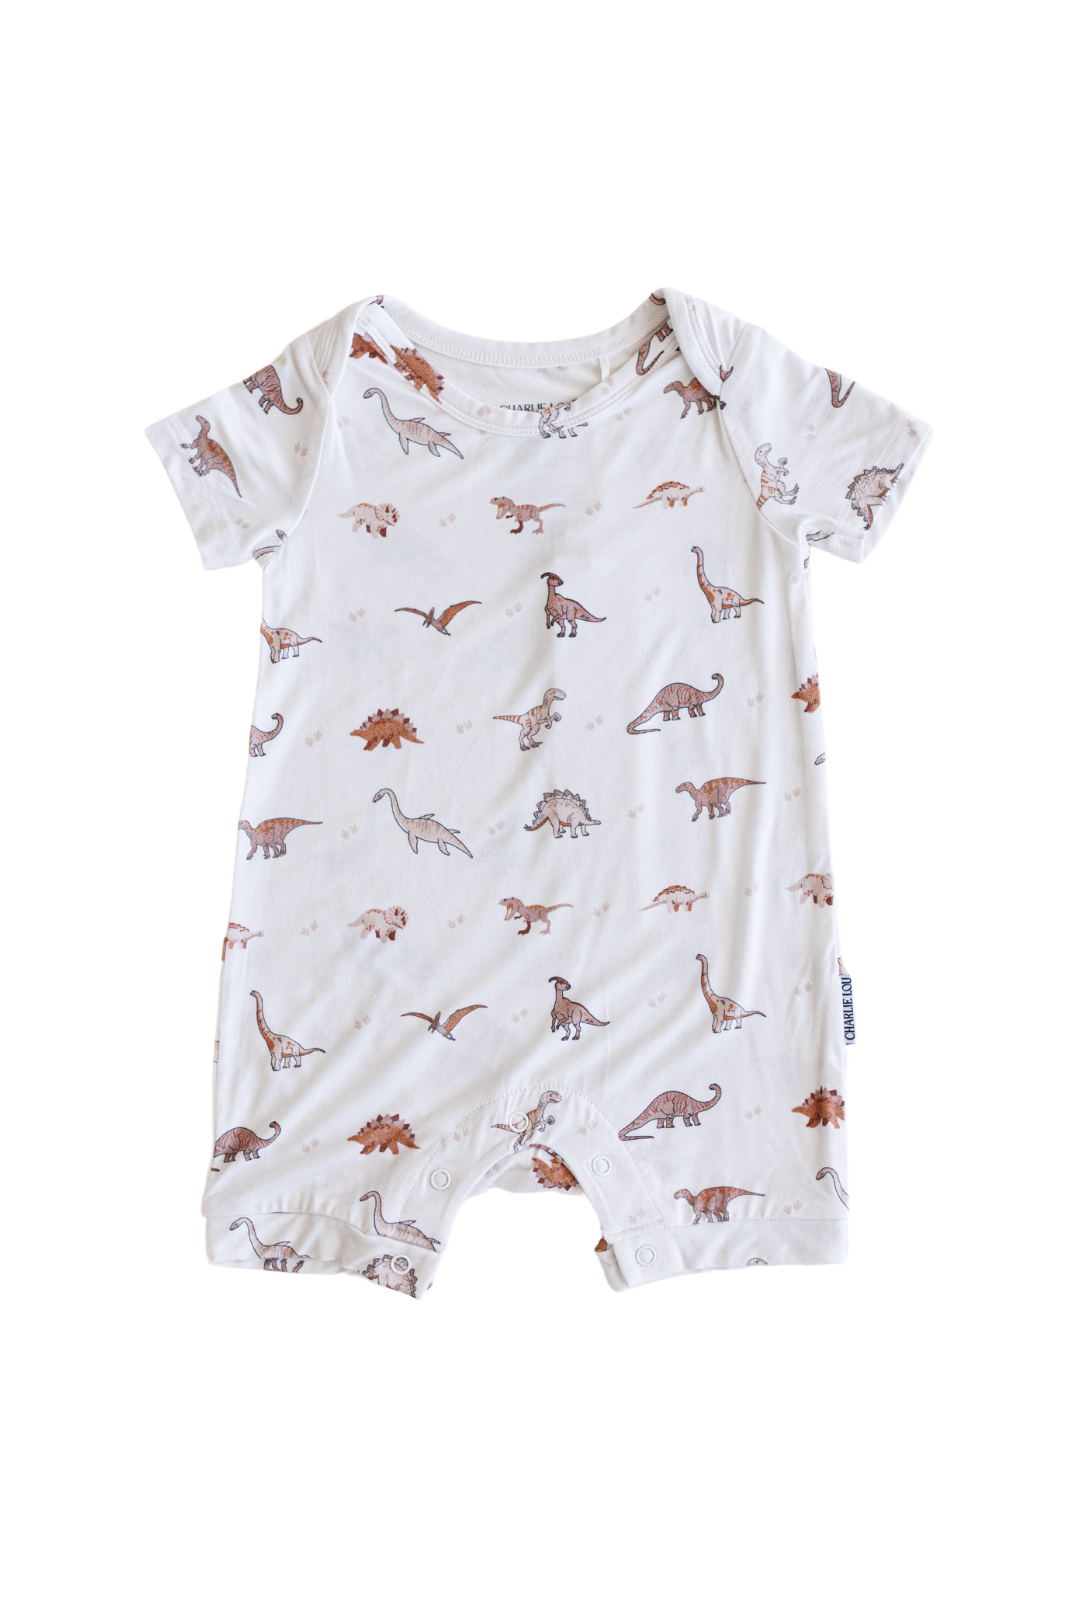 Gender neutral short sleeve romper with crotch snaps made from bamboo with neutral dinosaur print for boys and girls.